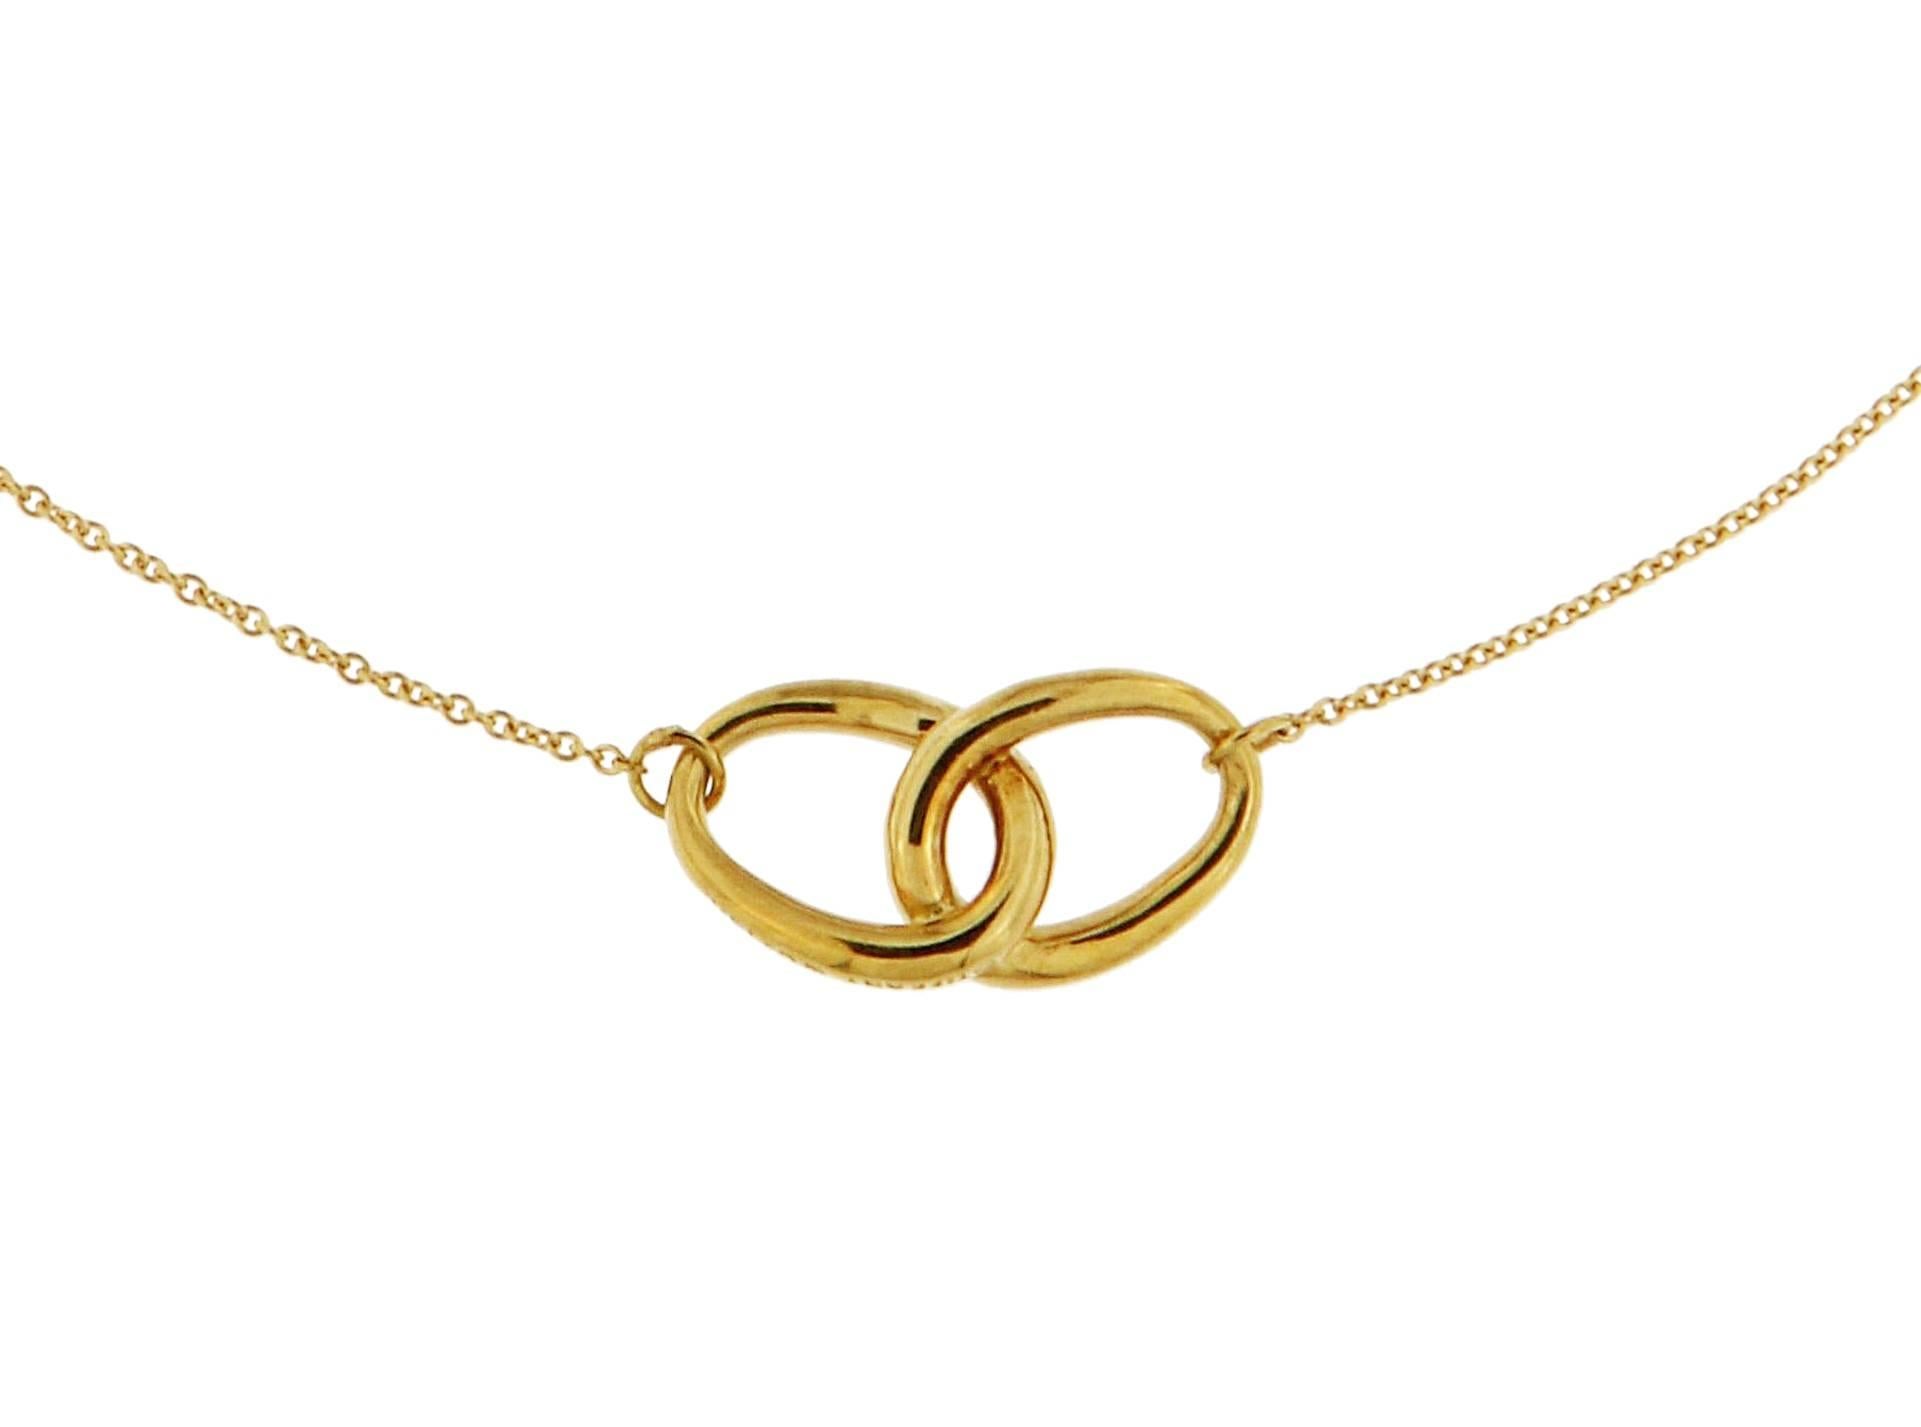 Tiffany & Co. 
Knot necklace by Elsa Peretti 

The knot size is 20 mm x 10 mm

Total choker length is 39 cm